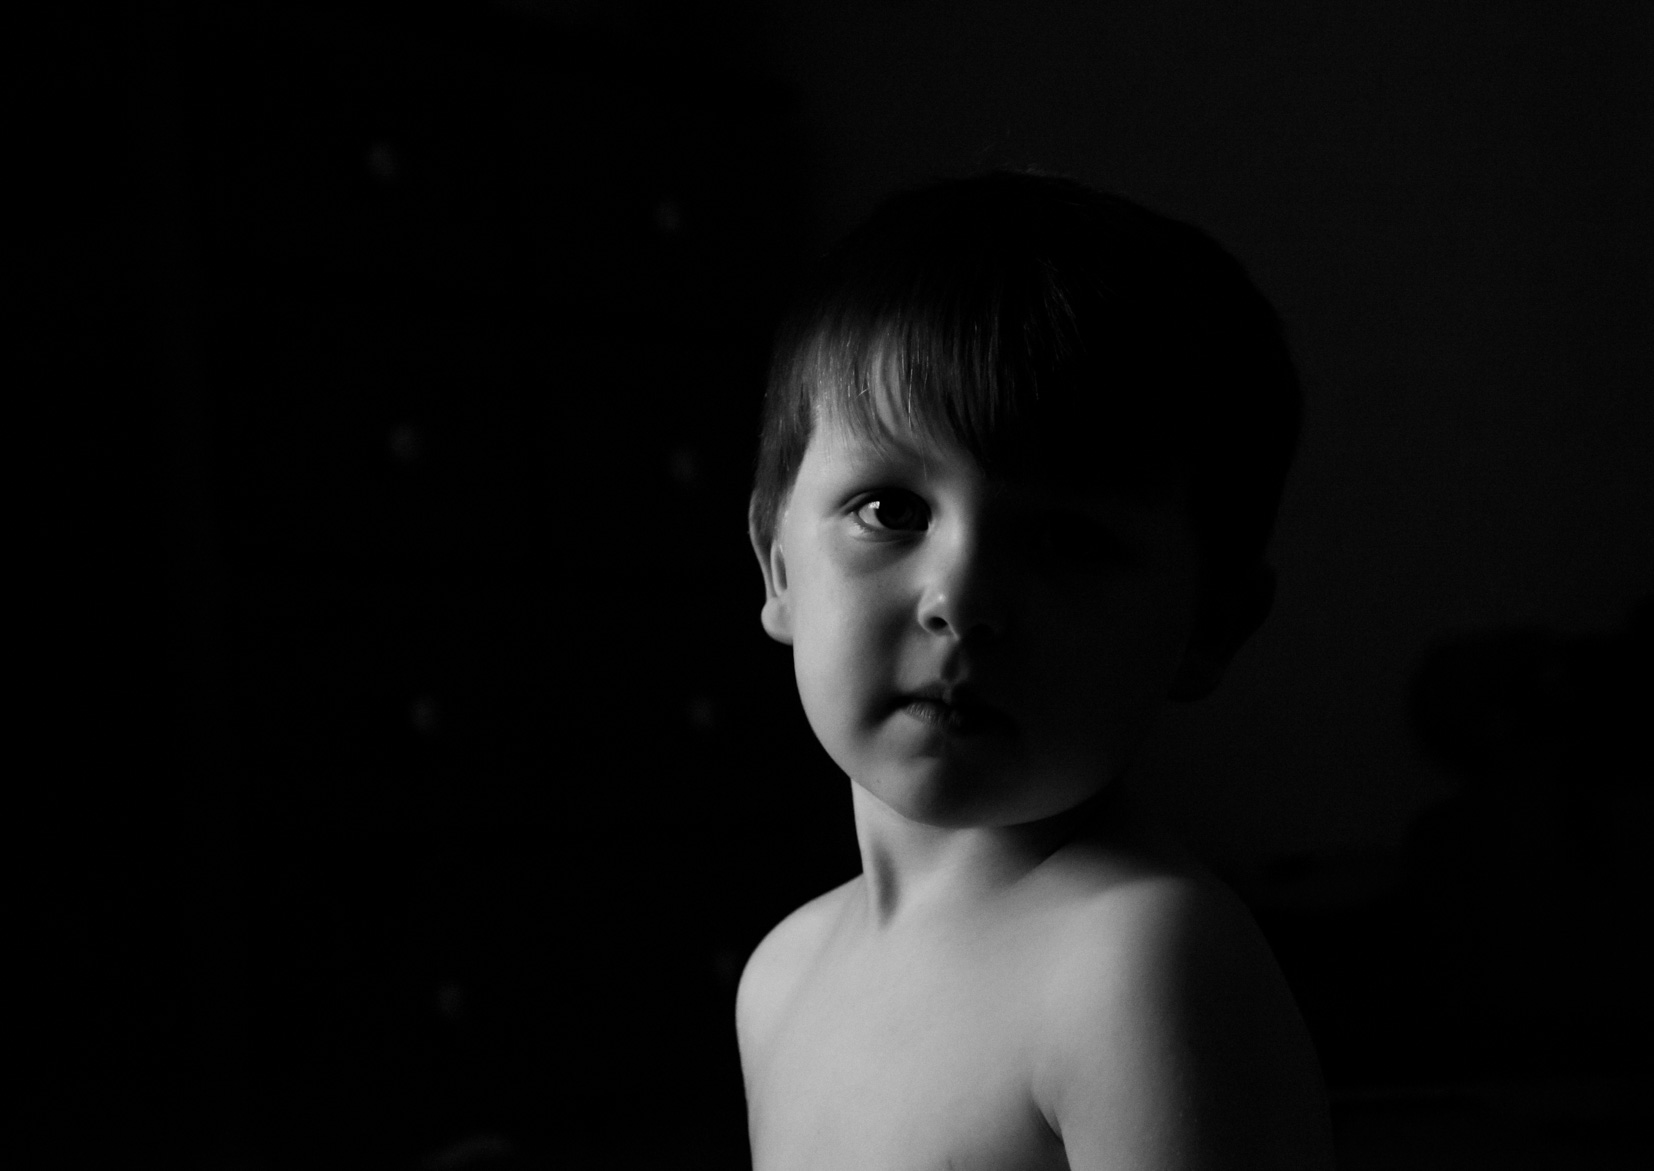 Big brother watching the little one (my oldest baby)  by Holly Naughton Photography